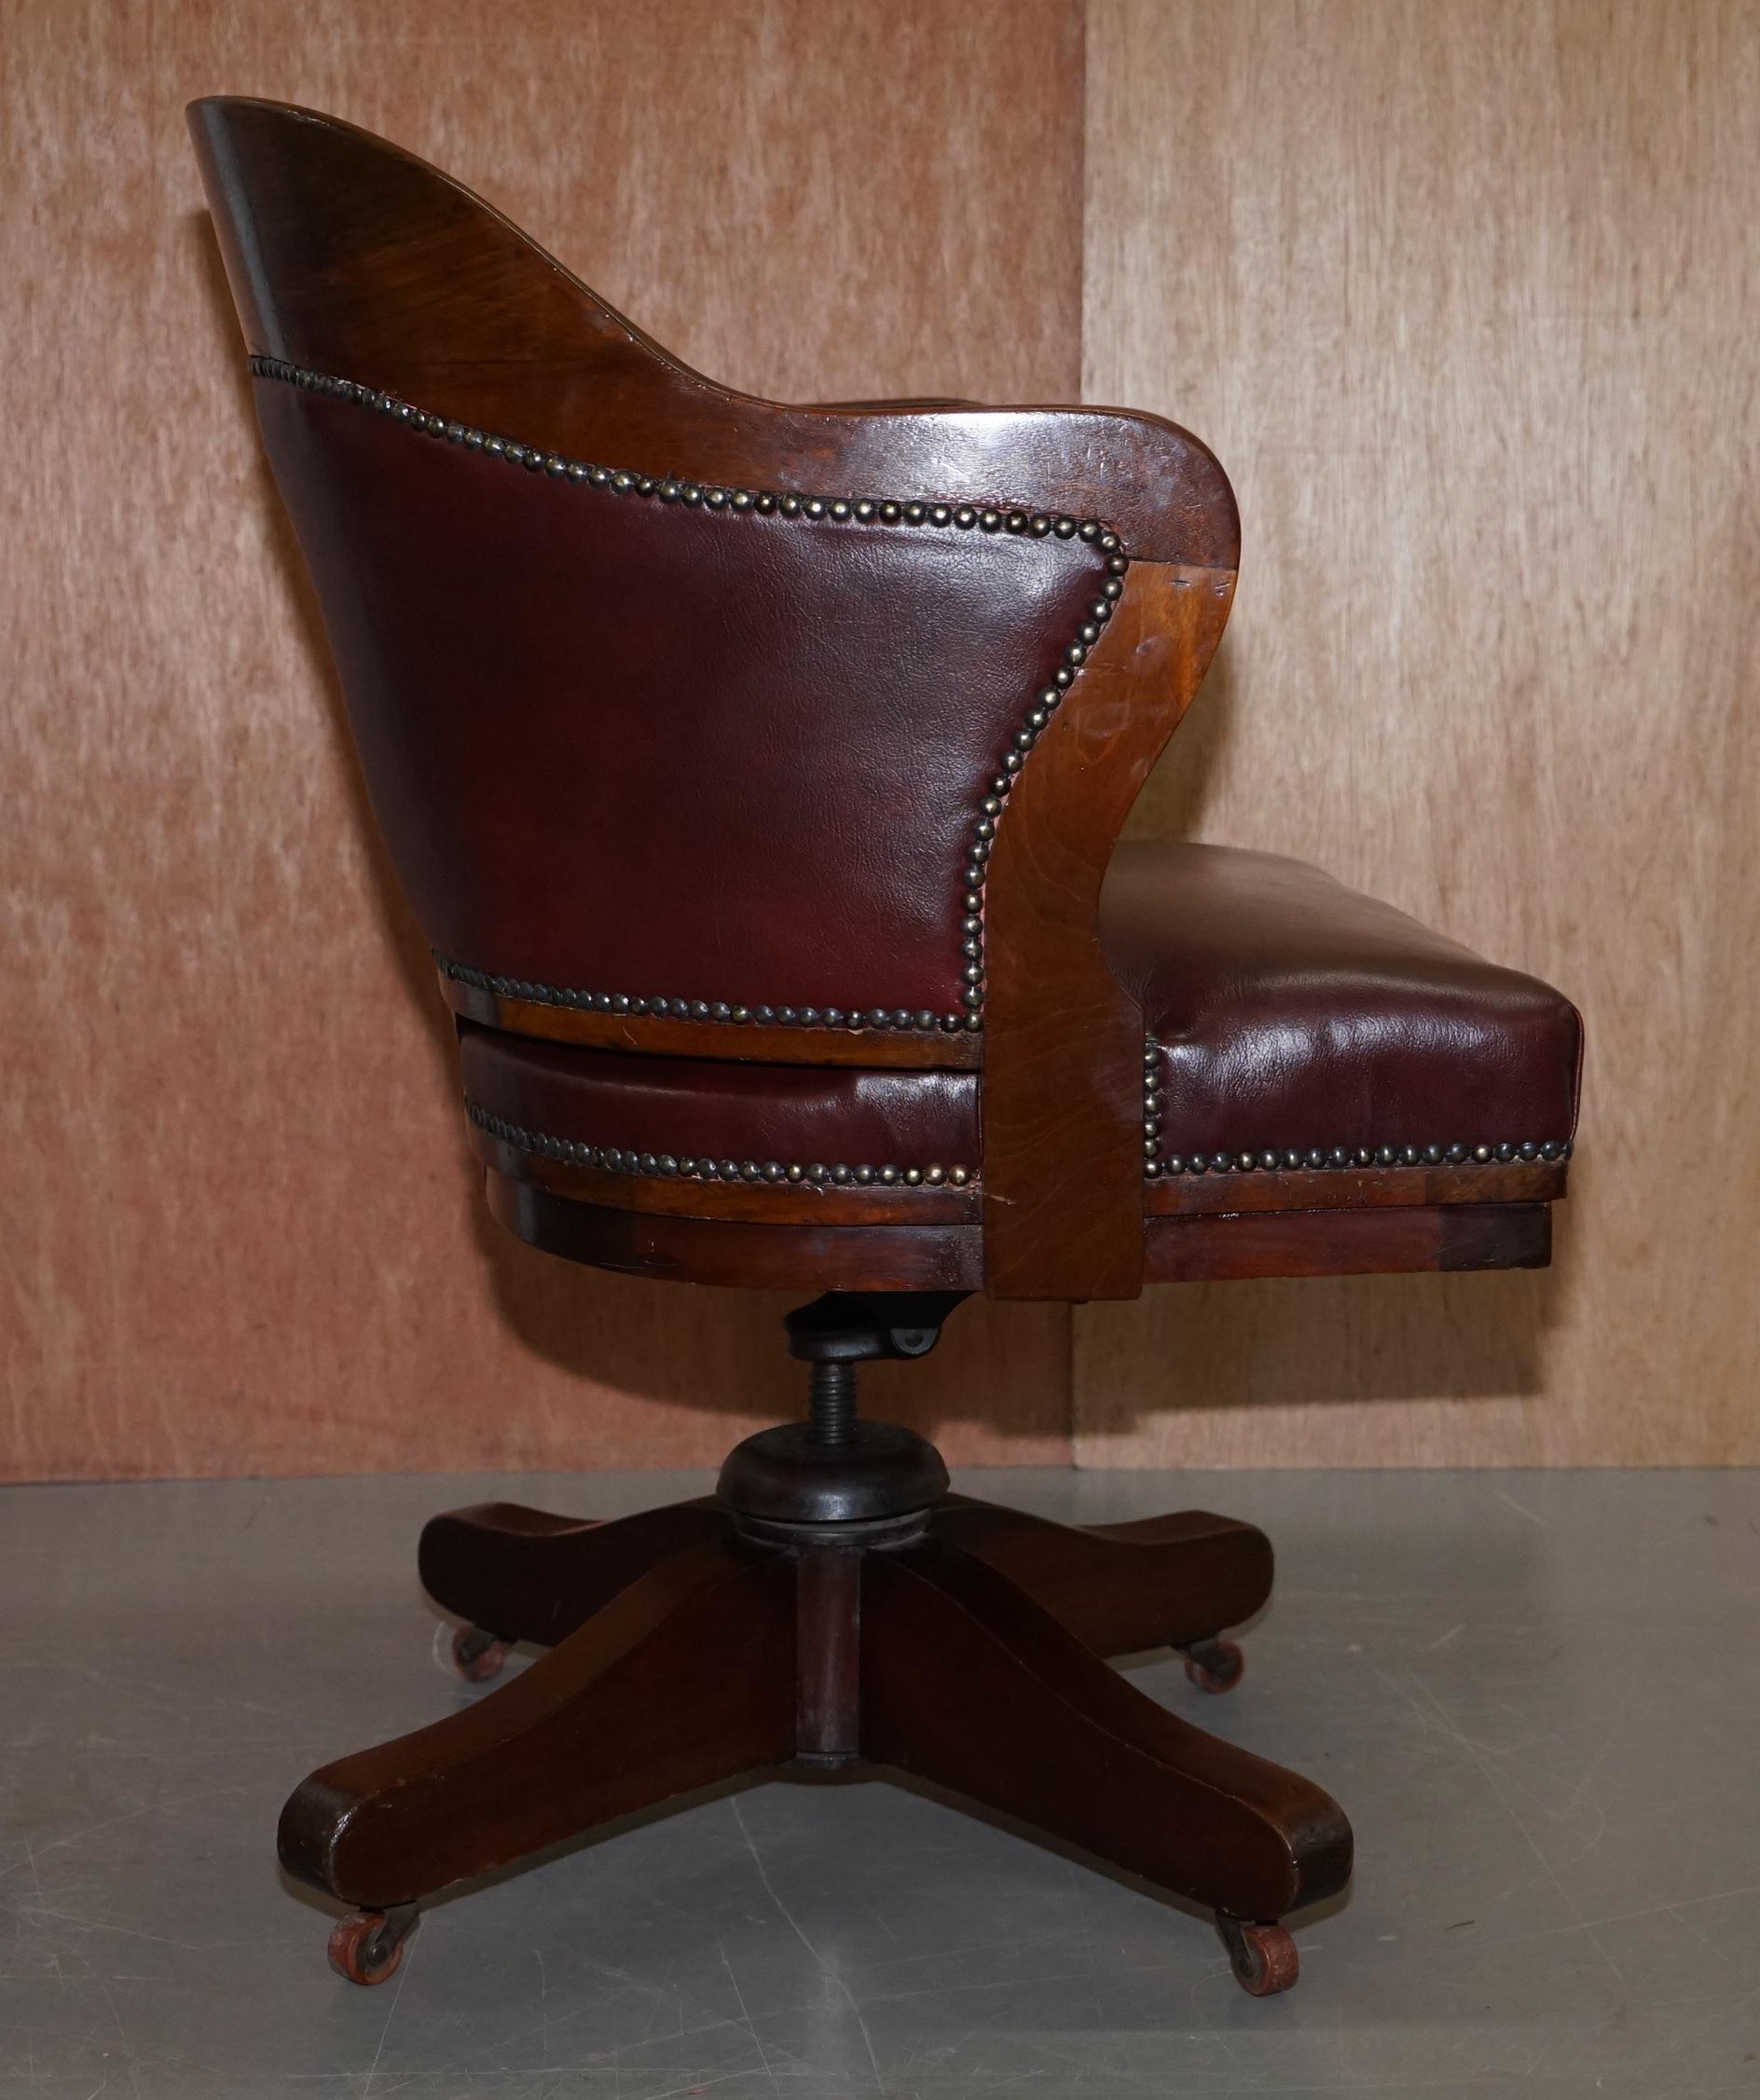 1900 Wylie & Lochhead by Appointment to the King Oxblood Leather Captains Chair 4